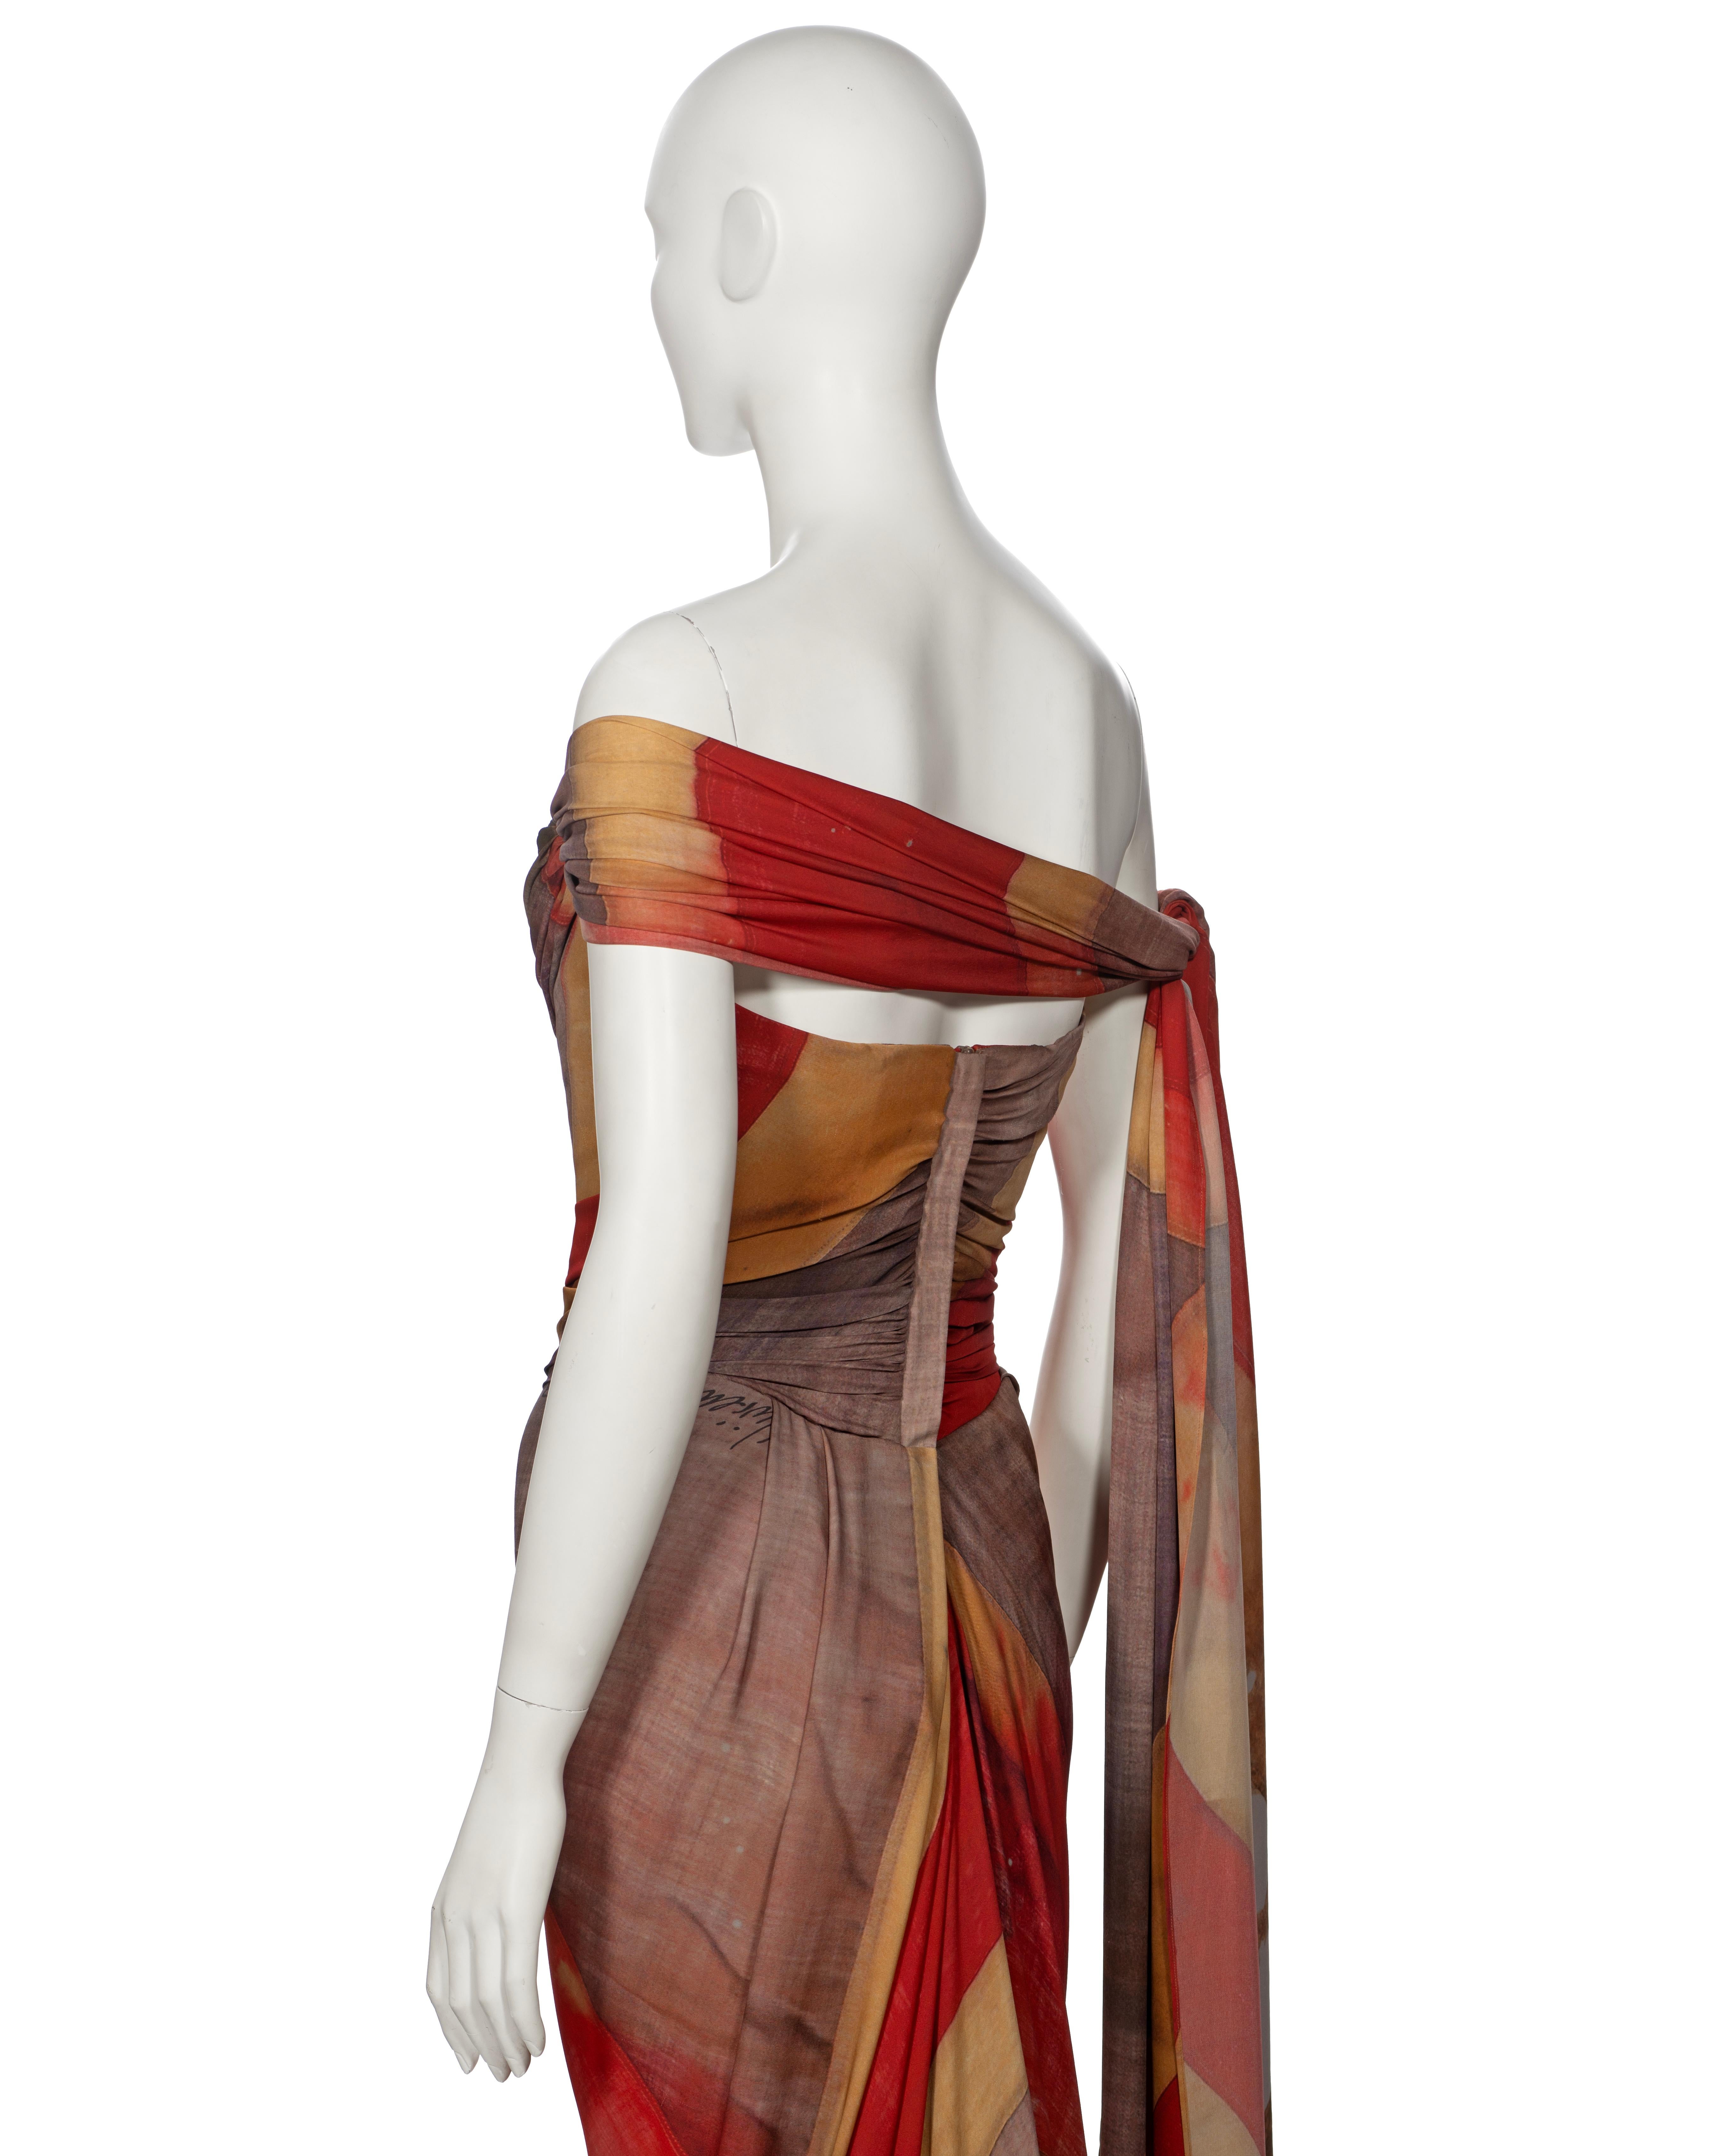 Vivienne Westwood The Queen's Diamond Jubilee Corseted Draped Silk Dress, 2012 For Sale 9